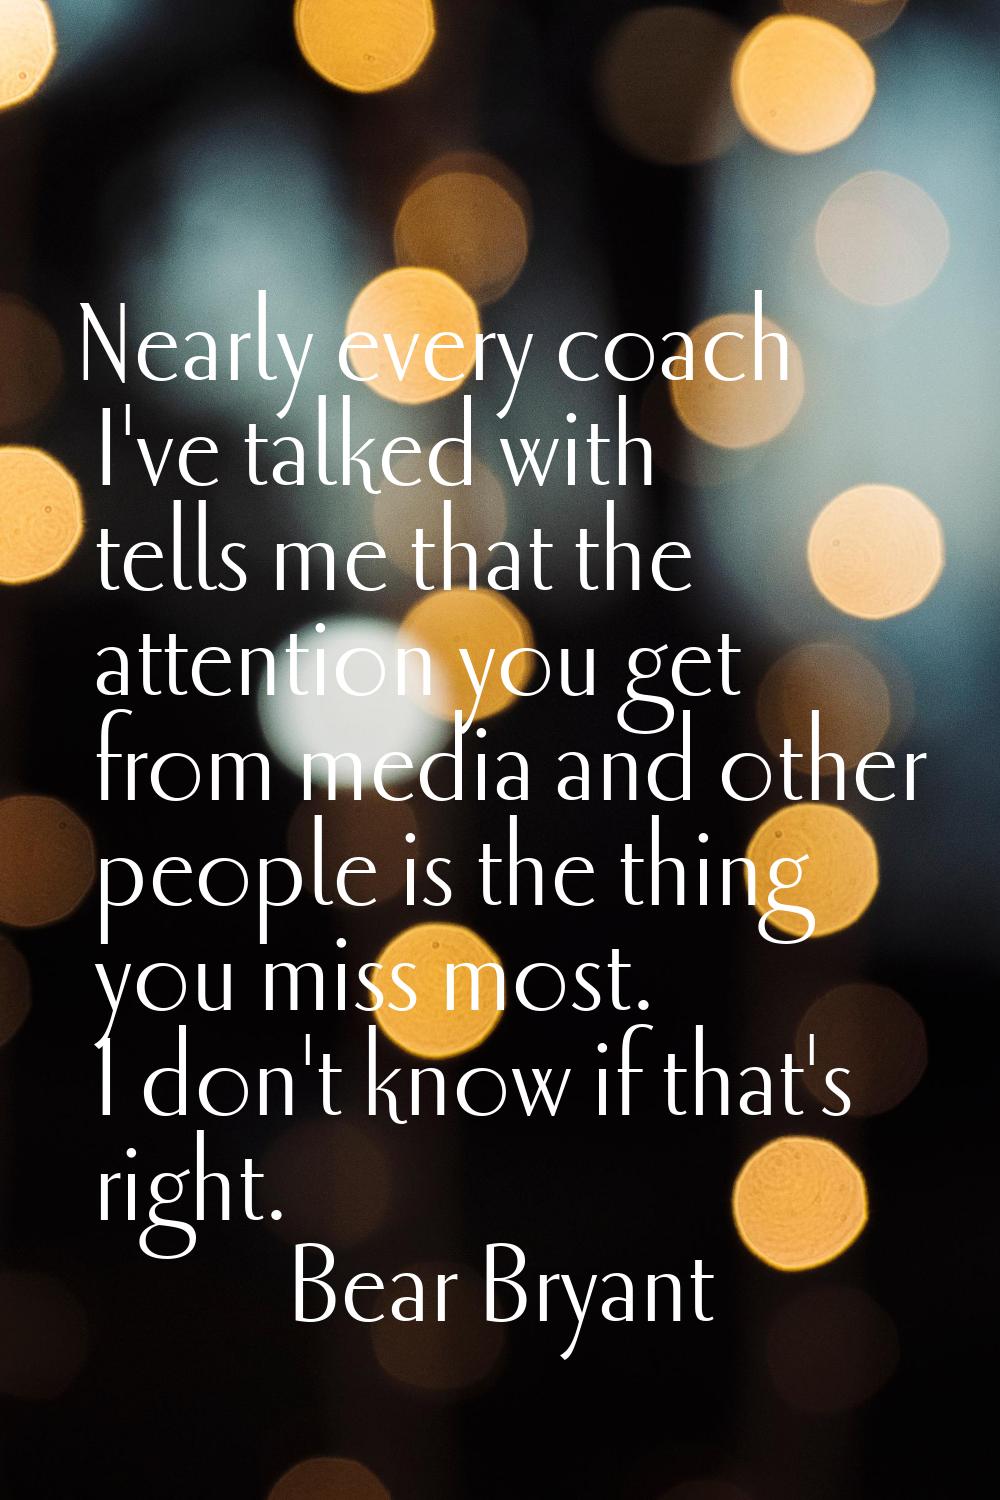 Nearly every coach I've talked with tells me that the attention you get from media and other people